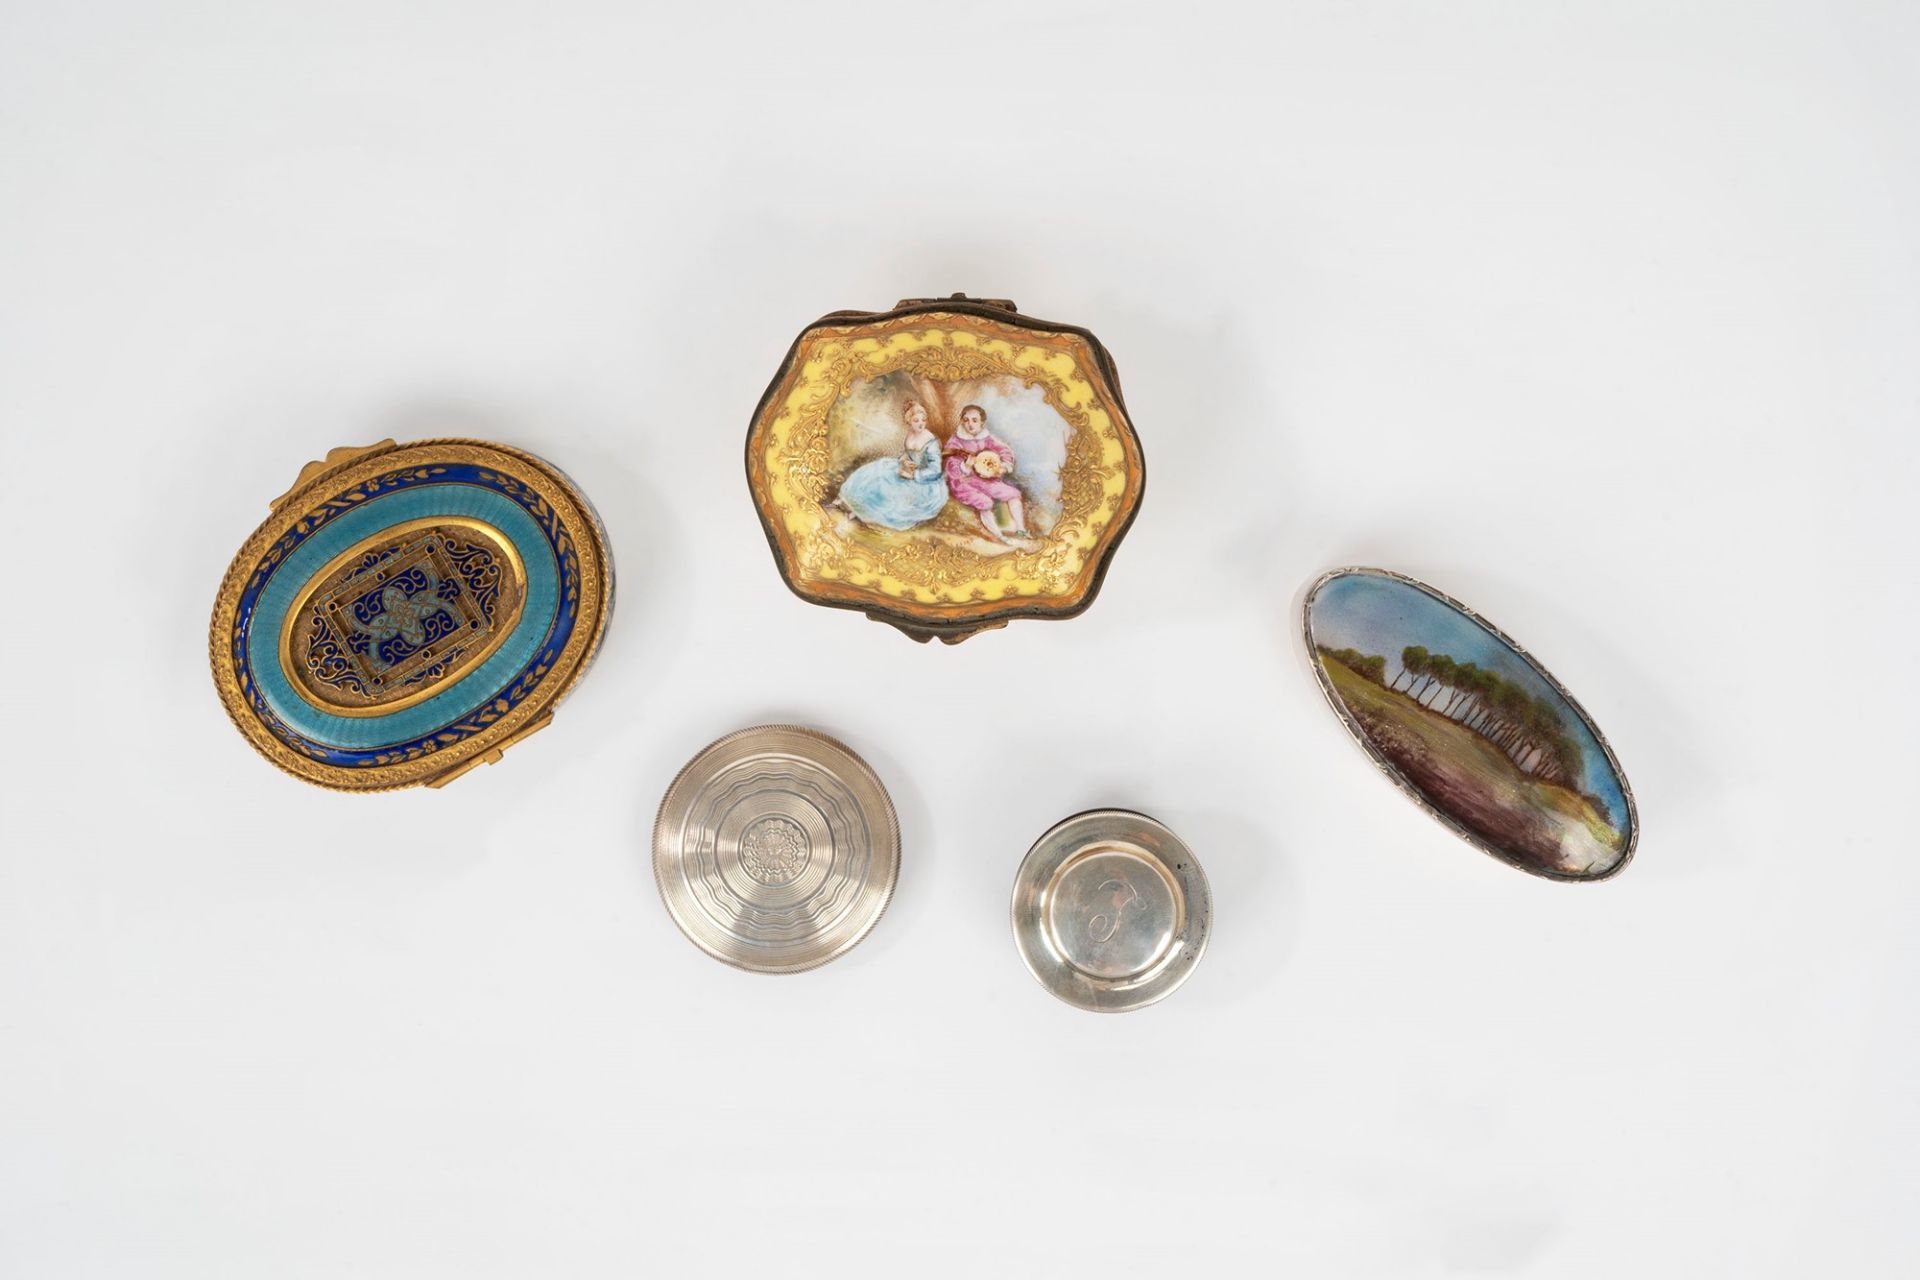 Lot consisting of three boxes and a powder compact, 19th-20th centuries - Image 2 of 6